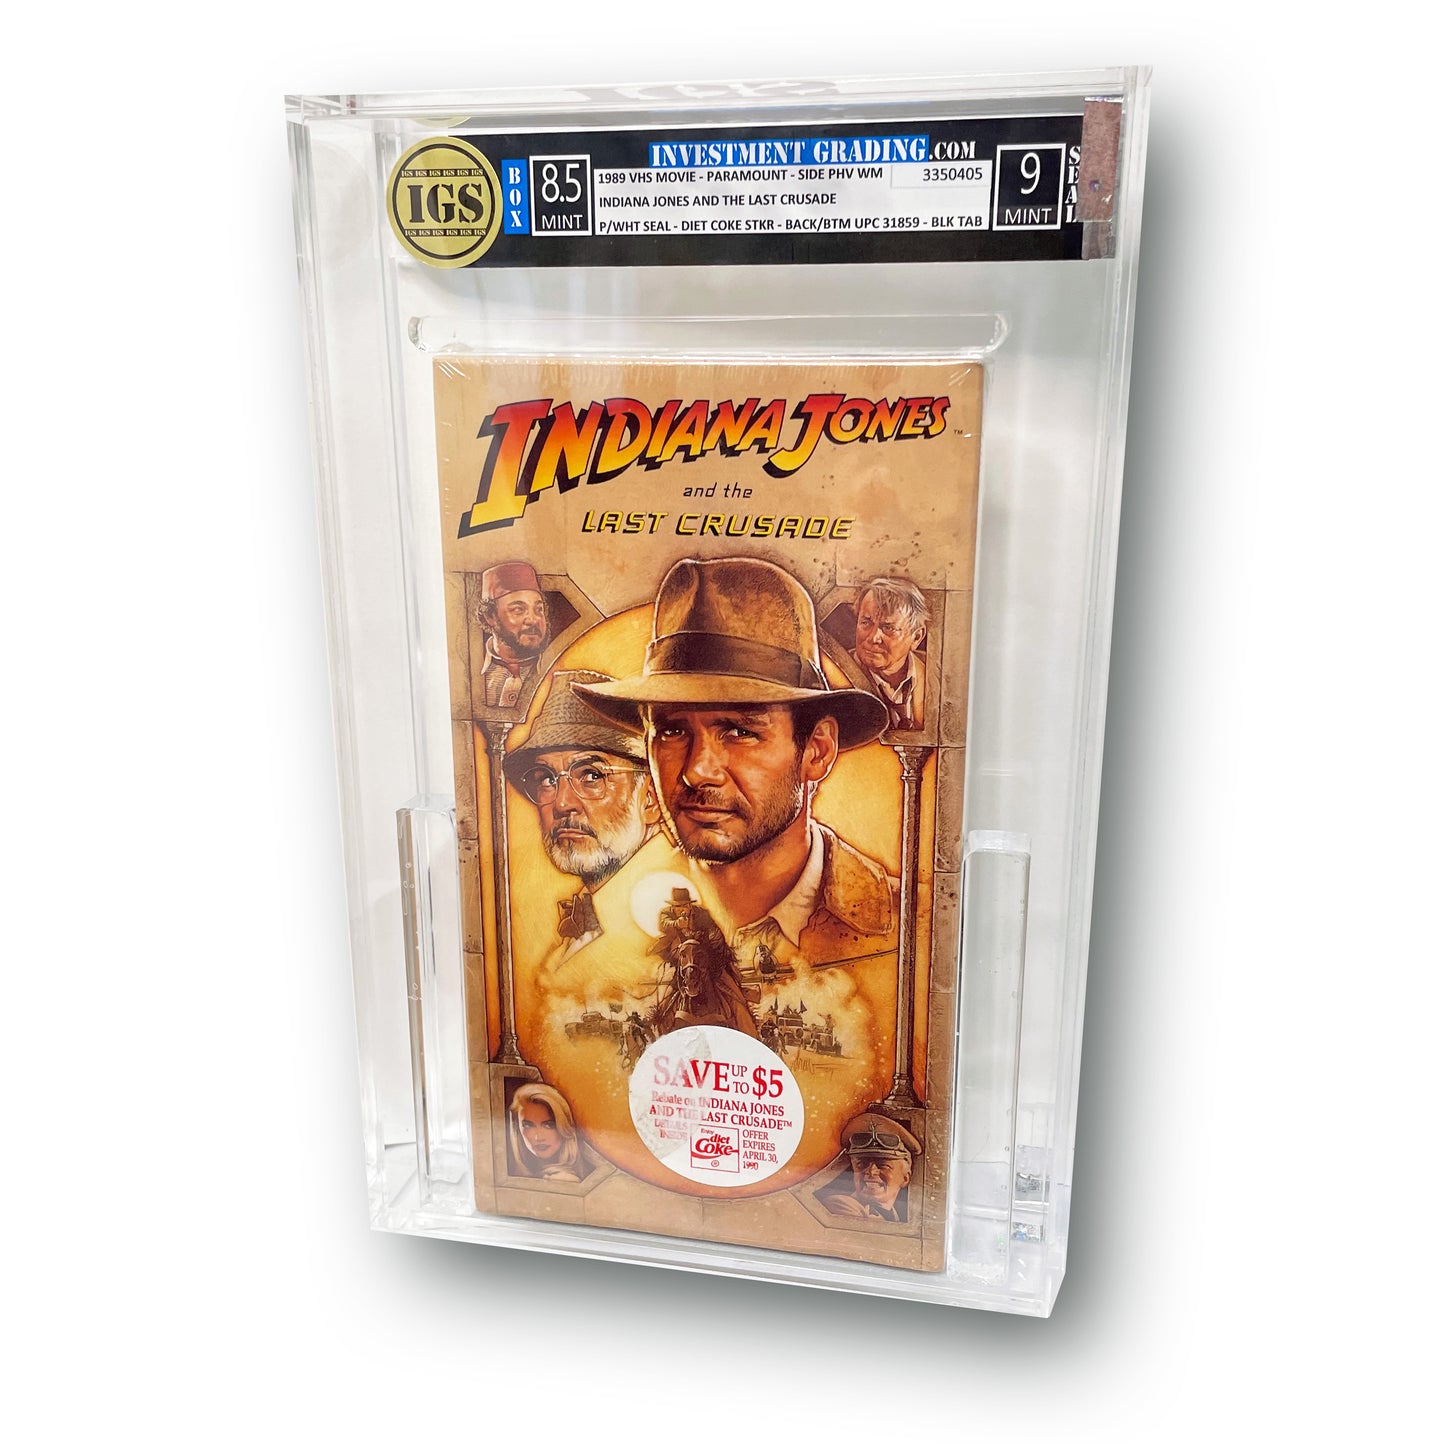 Graded VHS - Indiana Jones and the Last Crusade